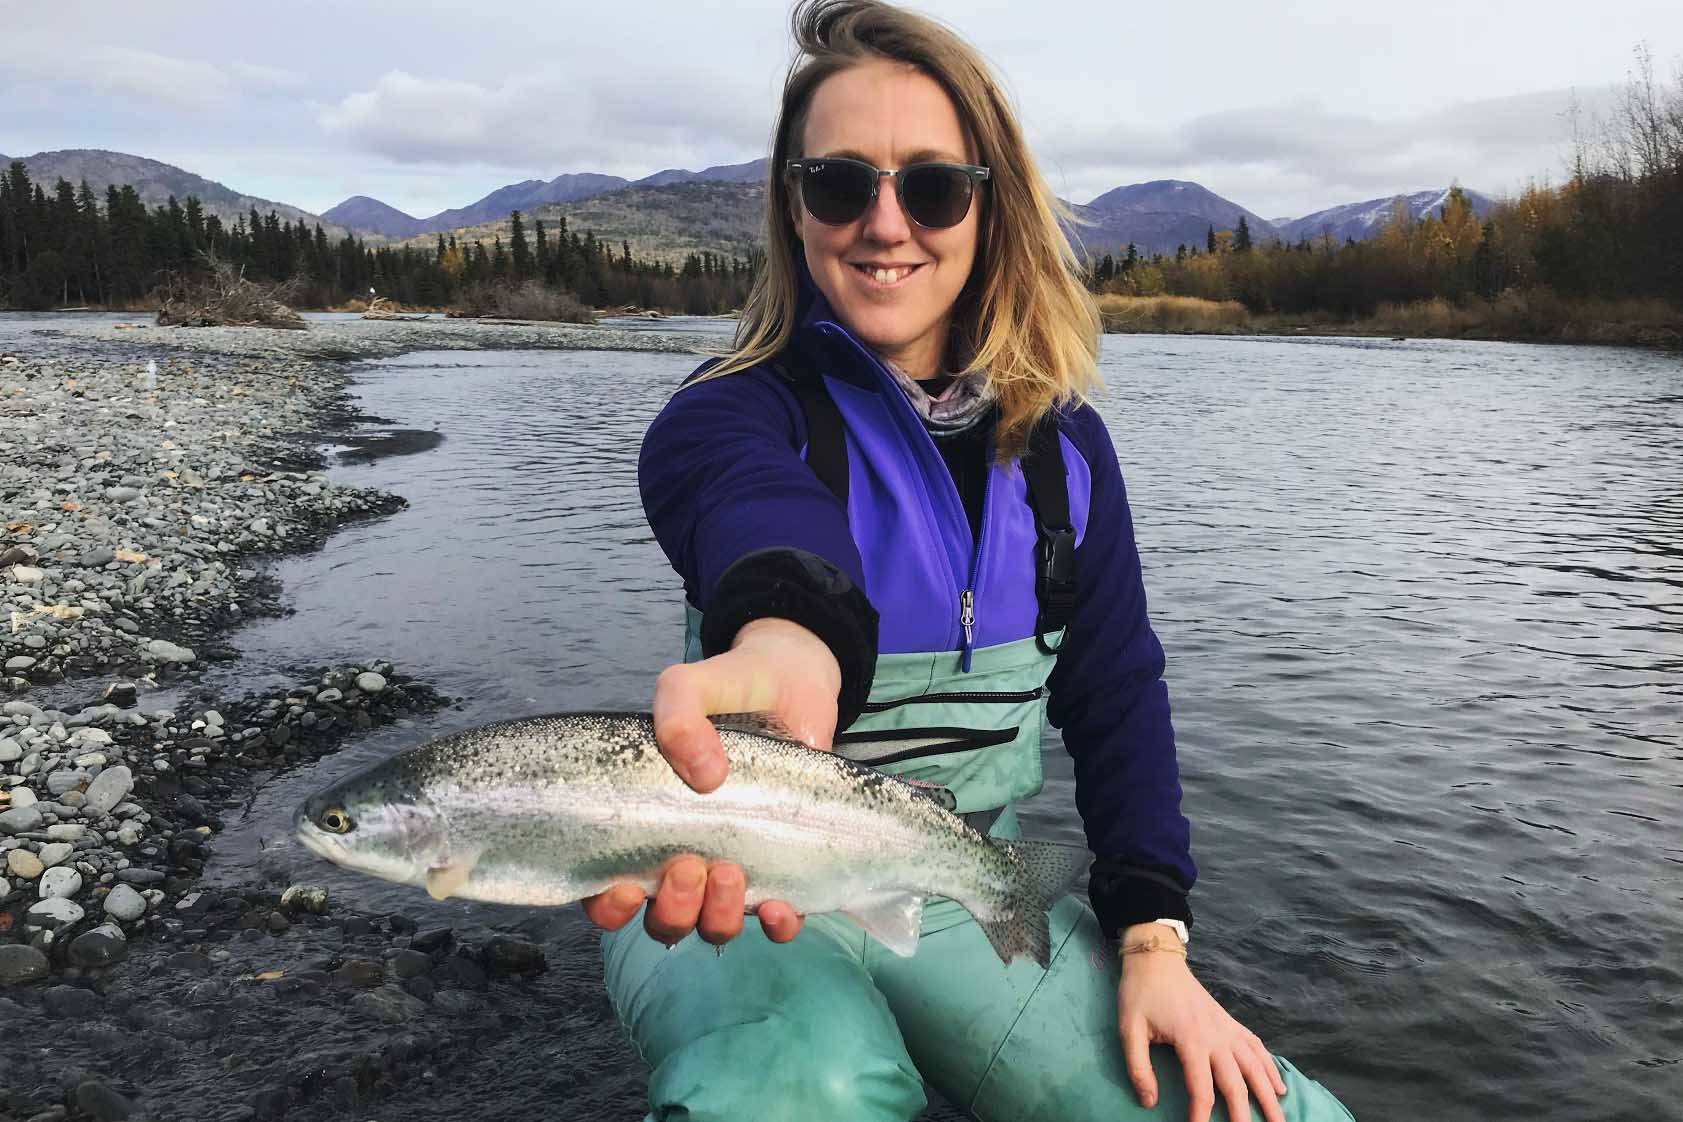 This photo taken in October 2017 shows author Kat Sorensen with the first fish she ever caught using a fly rod! (Photo courtesy of Kat Sorensen)